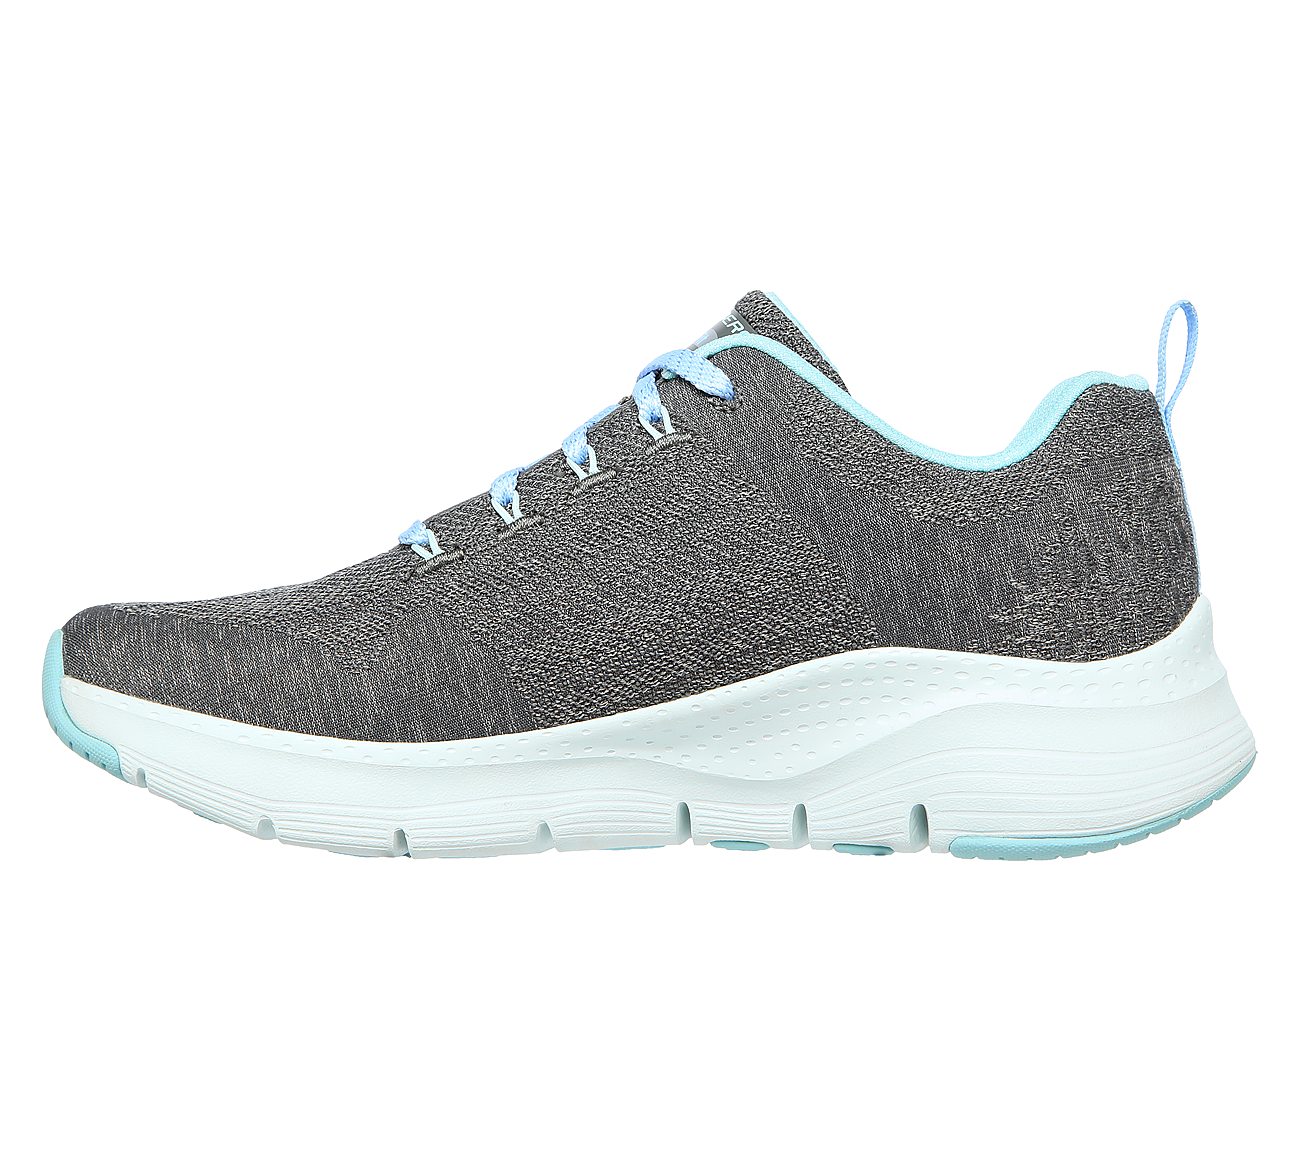 ARCH FIT-COMFY WAVE, CHARCOAL/TURQUOISE Footwear Left View